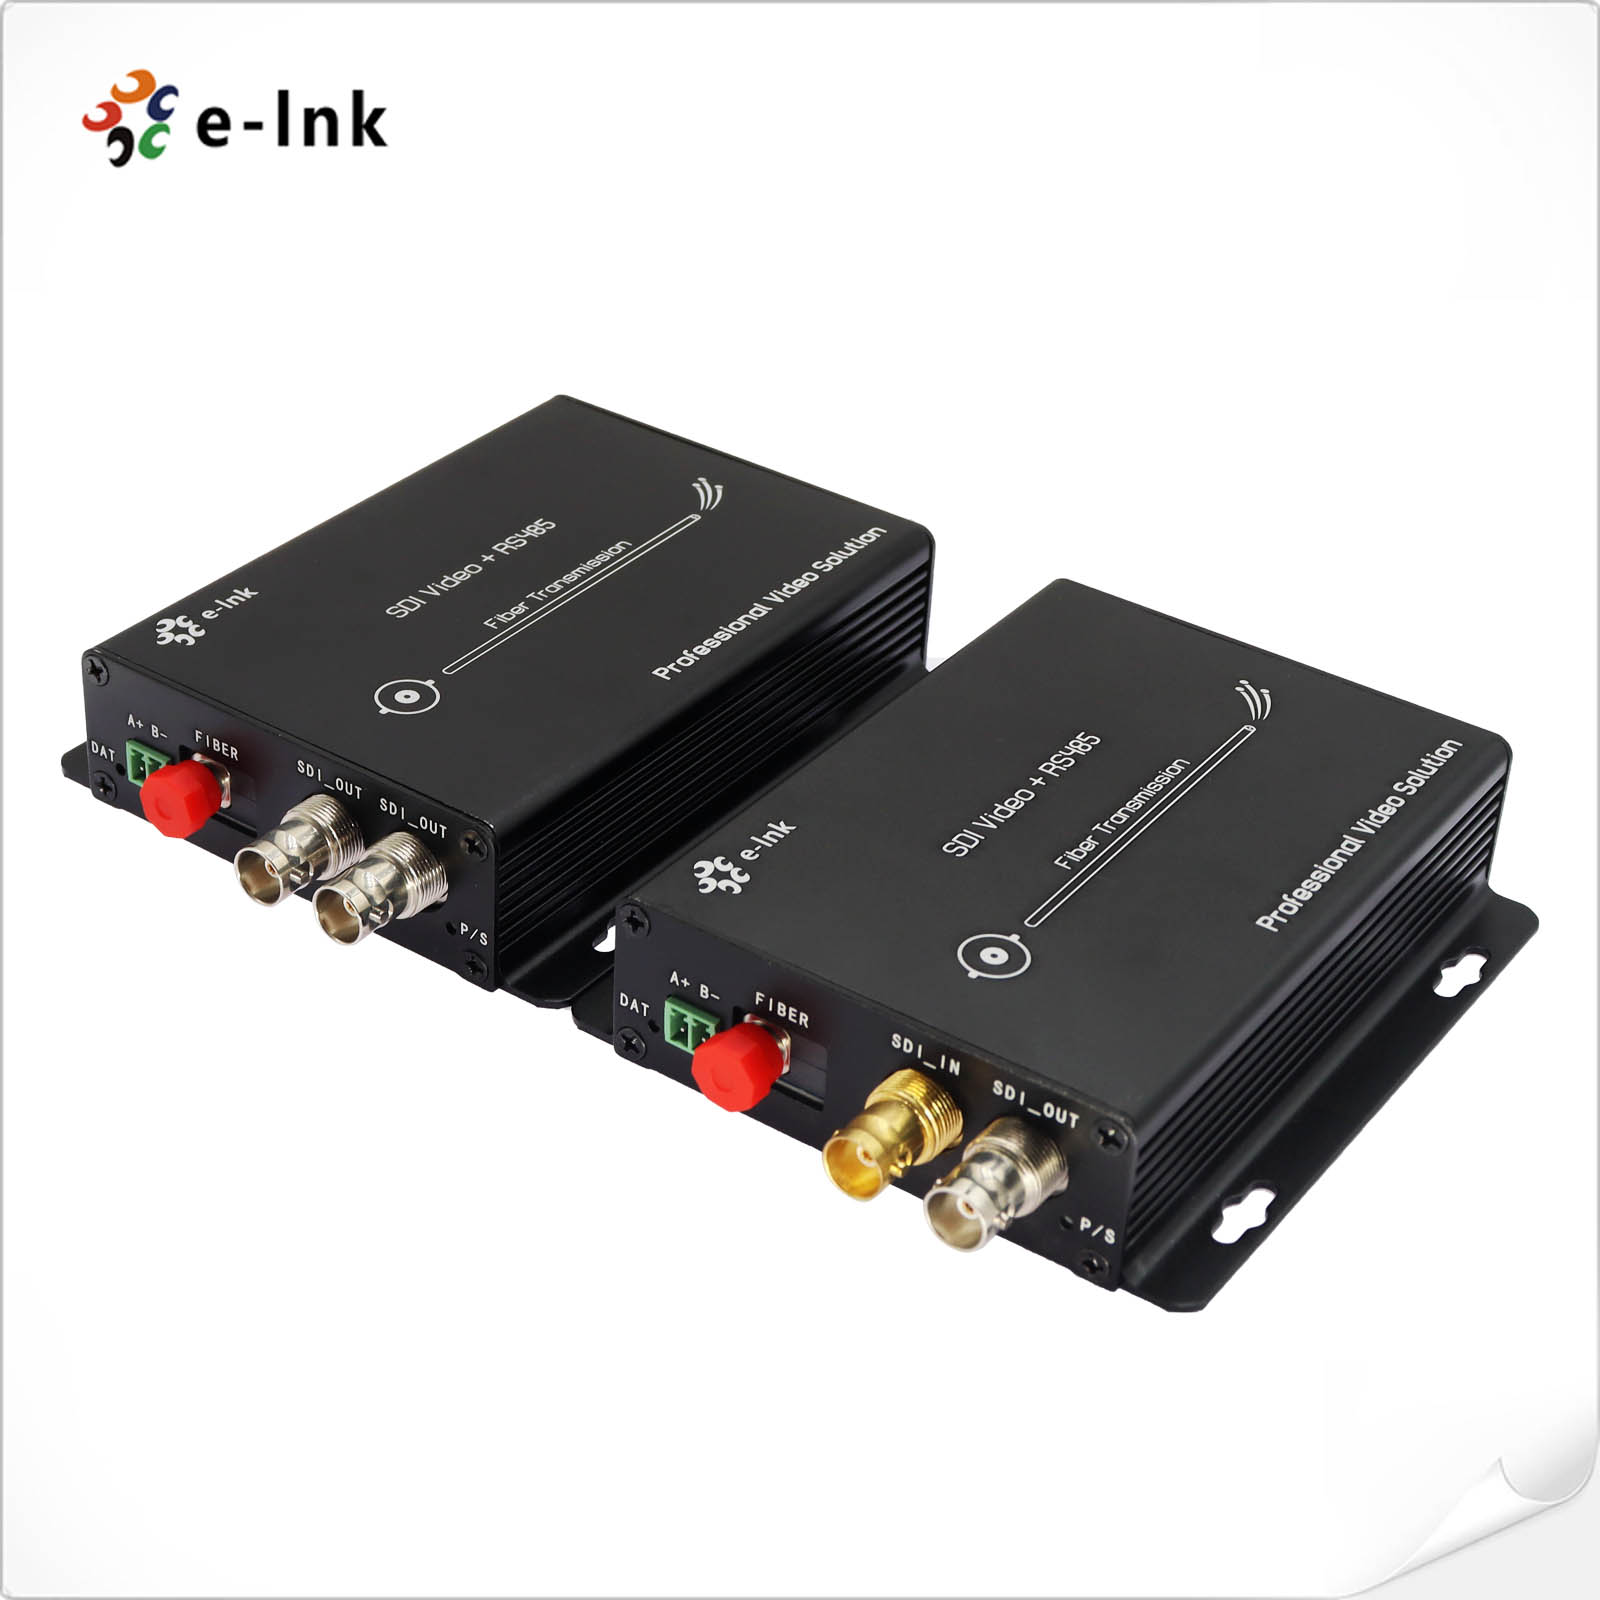 HD/3G-SDI to Fiber Converter with reversed RS422/485 data